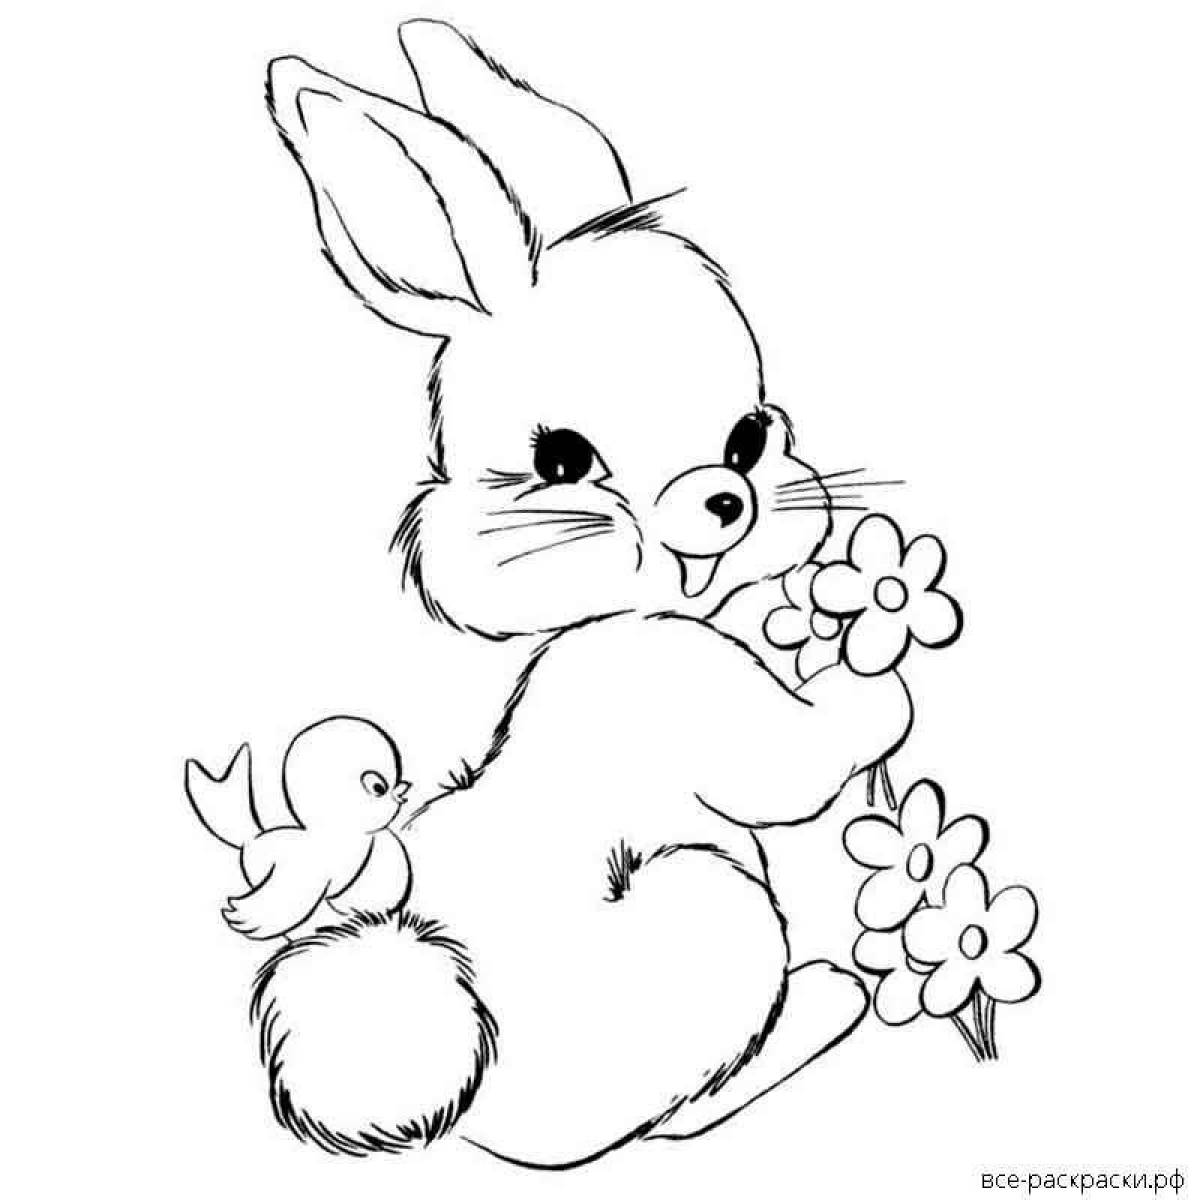 Cute and adorable bunny coloring book